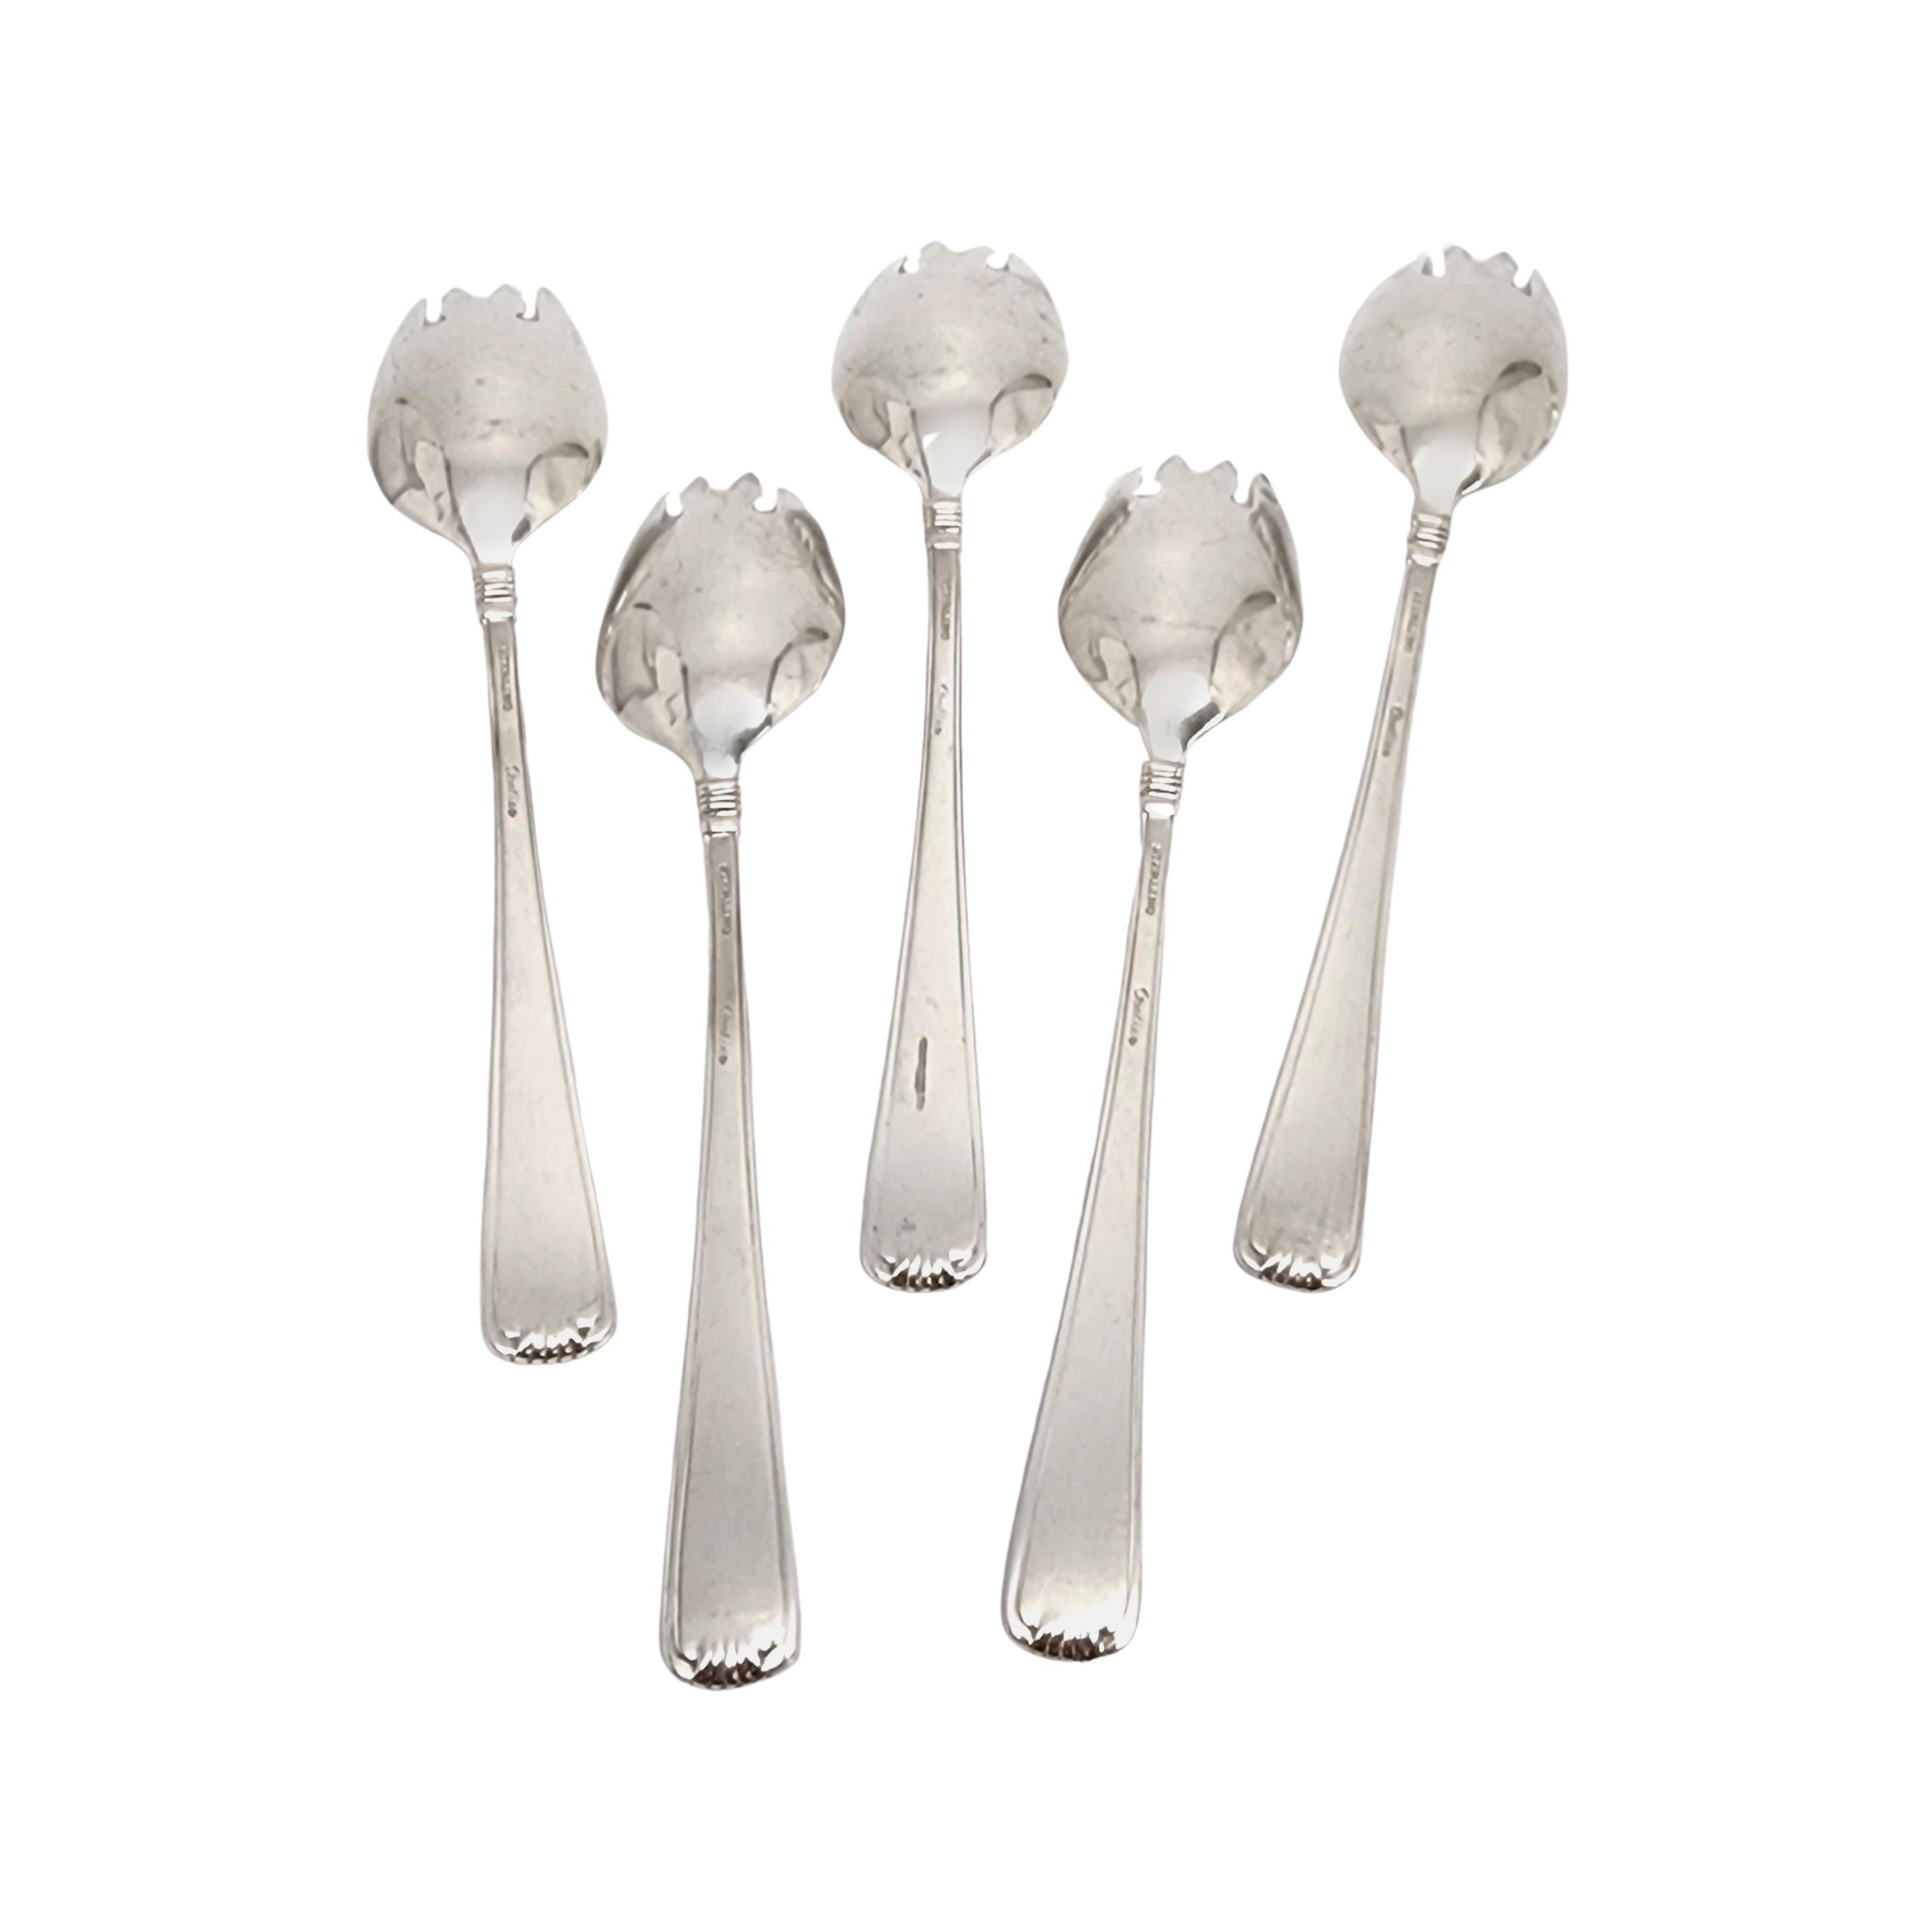 Set of 5 sterling silver ice cream forks in the Marie Louise pattern by Cartier with monogram.

Monogram appears to be D

Cartier's Marie Louise pattern features a simple and timeless scroll design with ribbed edging. These ice cream forks feature a